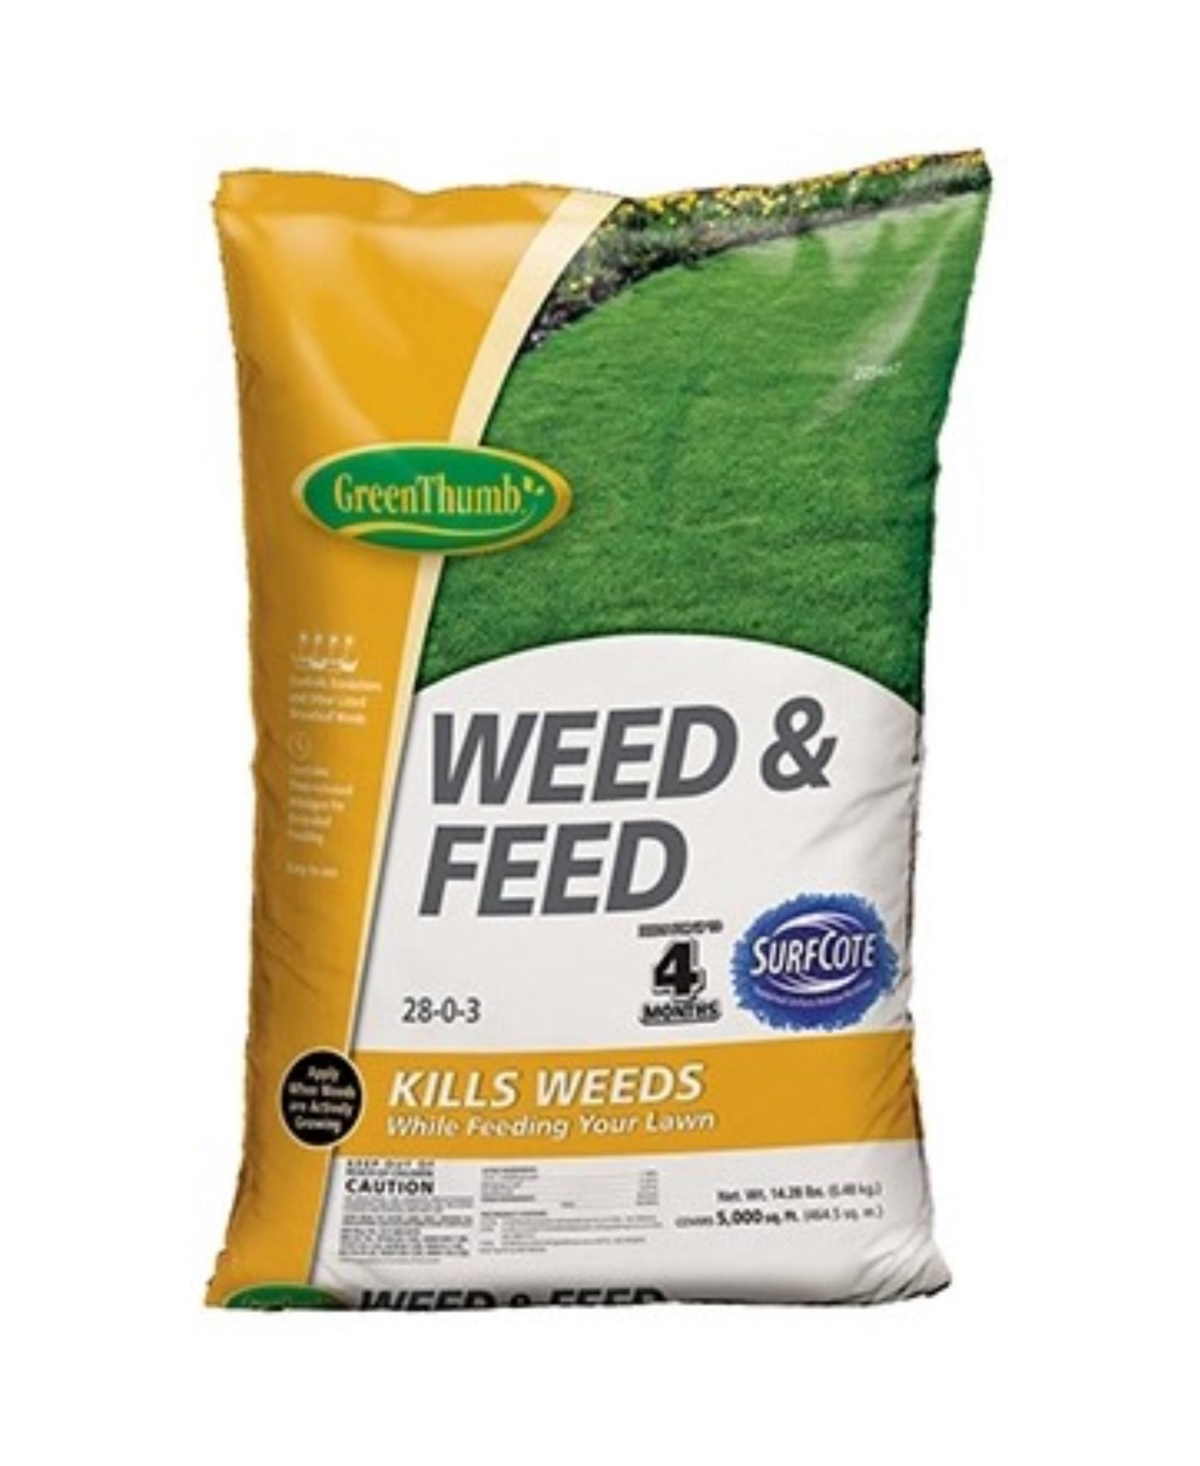 Weed and Feed Lawn Fertilizer With Surfcote - Multi